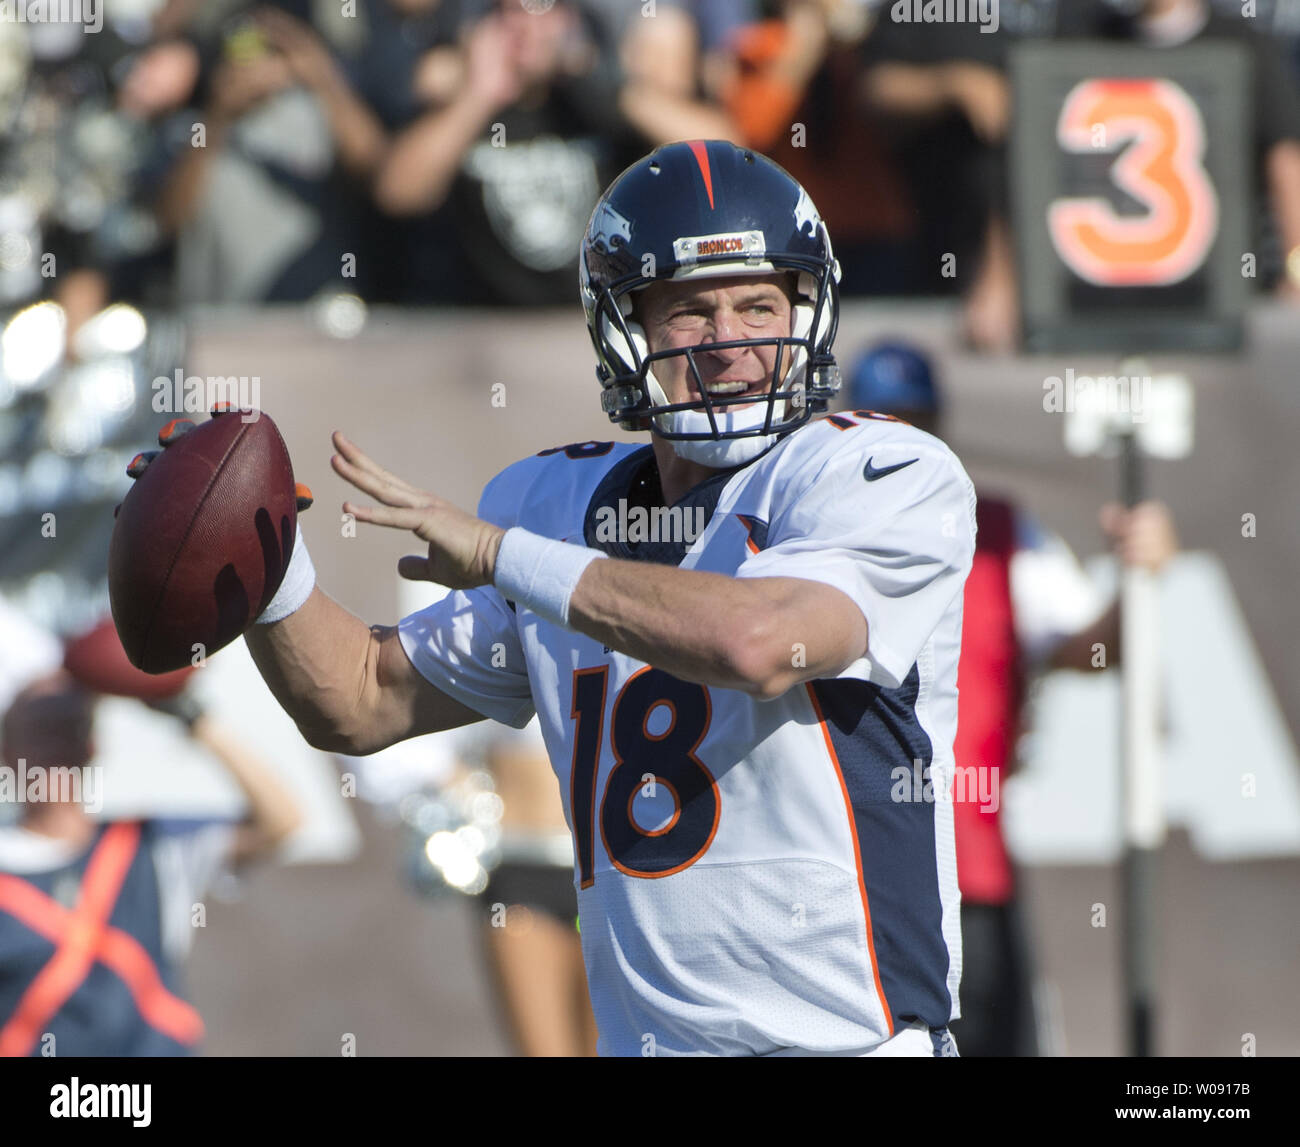 Denver Broncos Peyton Manning (18) throws on third down against the Oakland Raiders in the first quarter at O.co Coliseum in Oakland, California on November 9, 2014. The Broncos defeated the winless Raiders 41-17.     UPI/Terry Schmitt Stock Photo